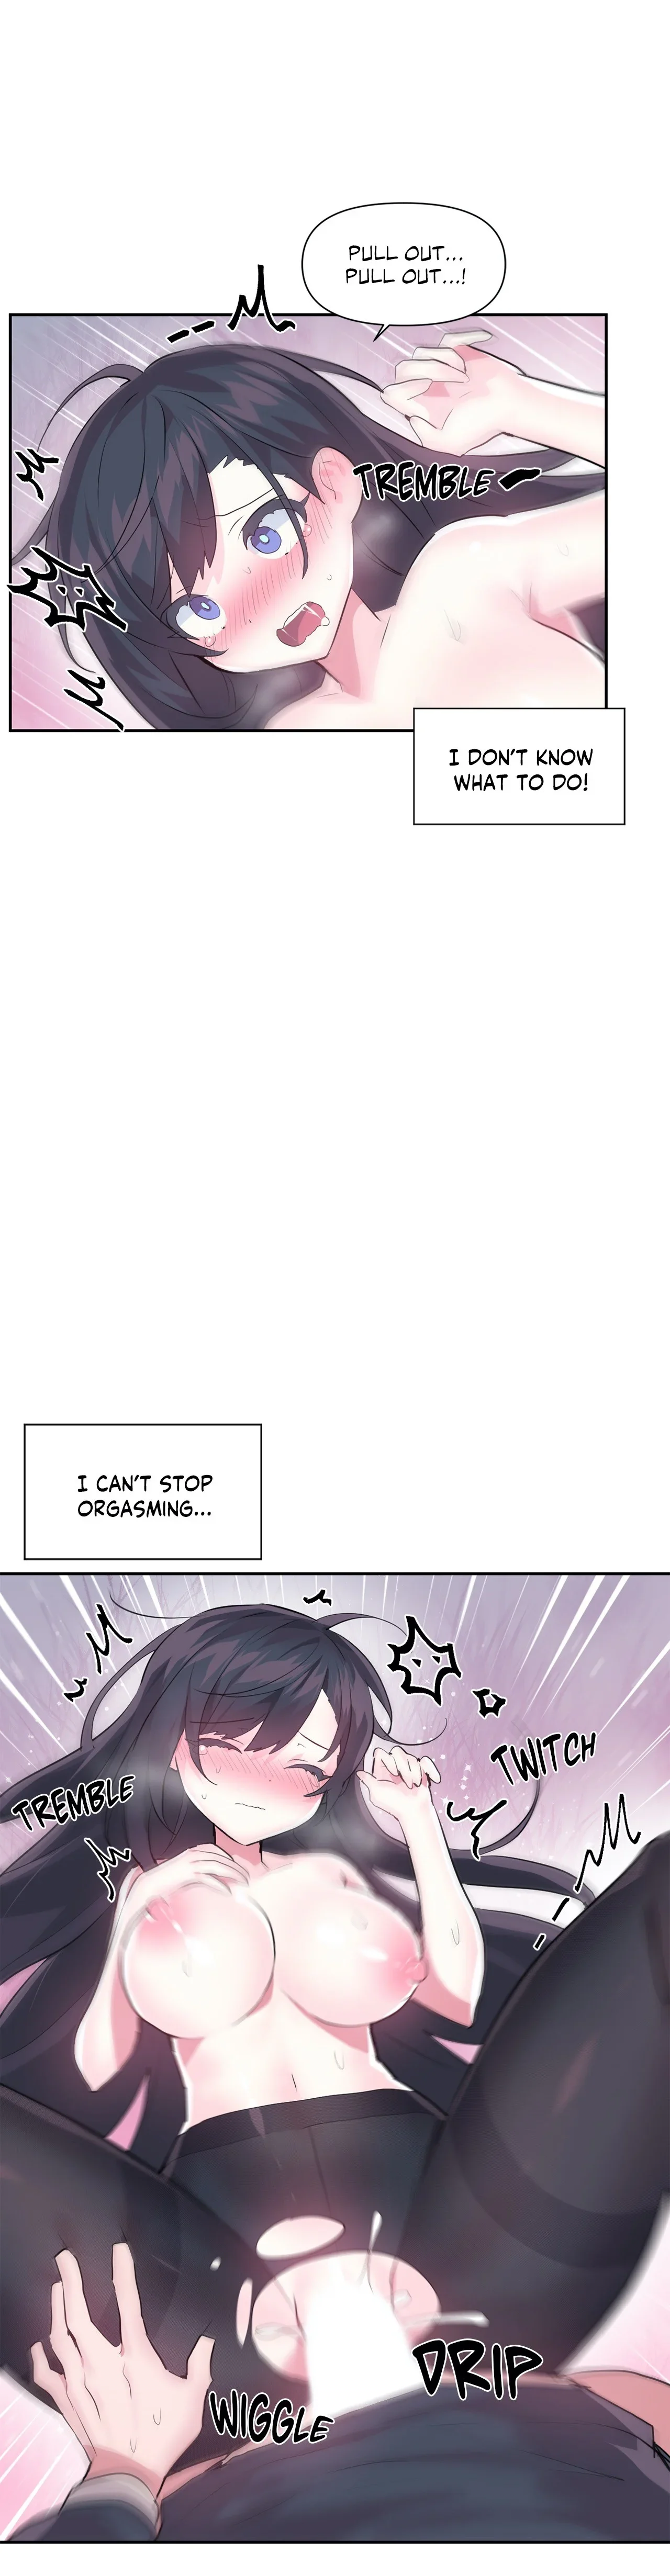 log-in-to-lust-a-land-chap-35-11